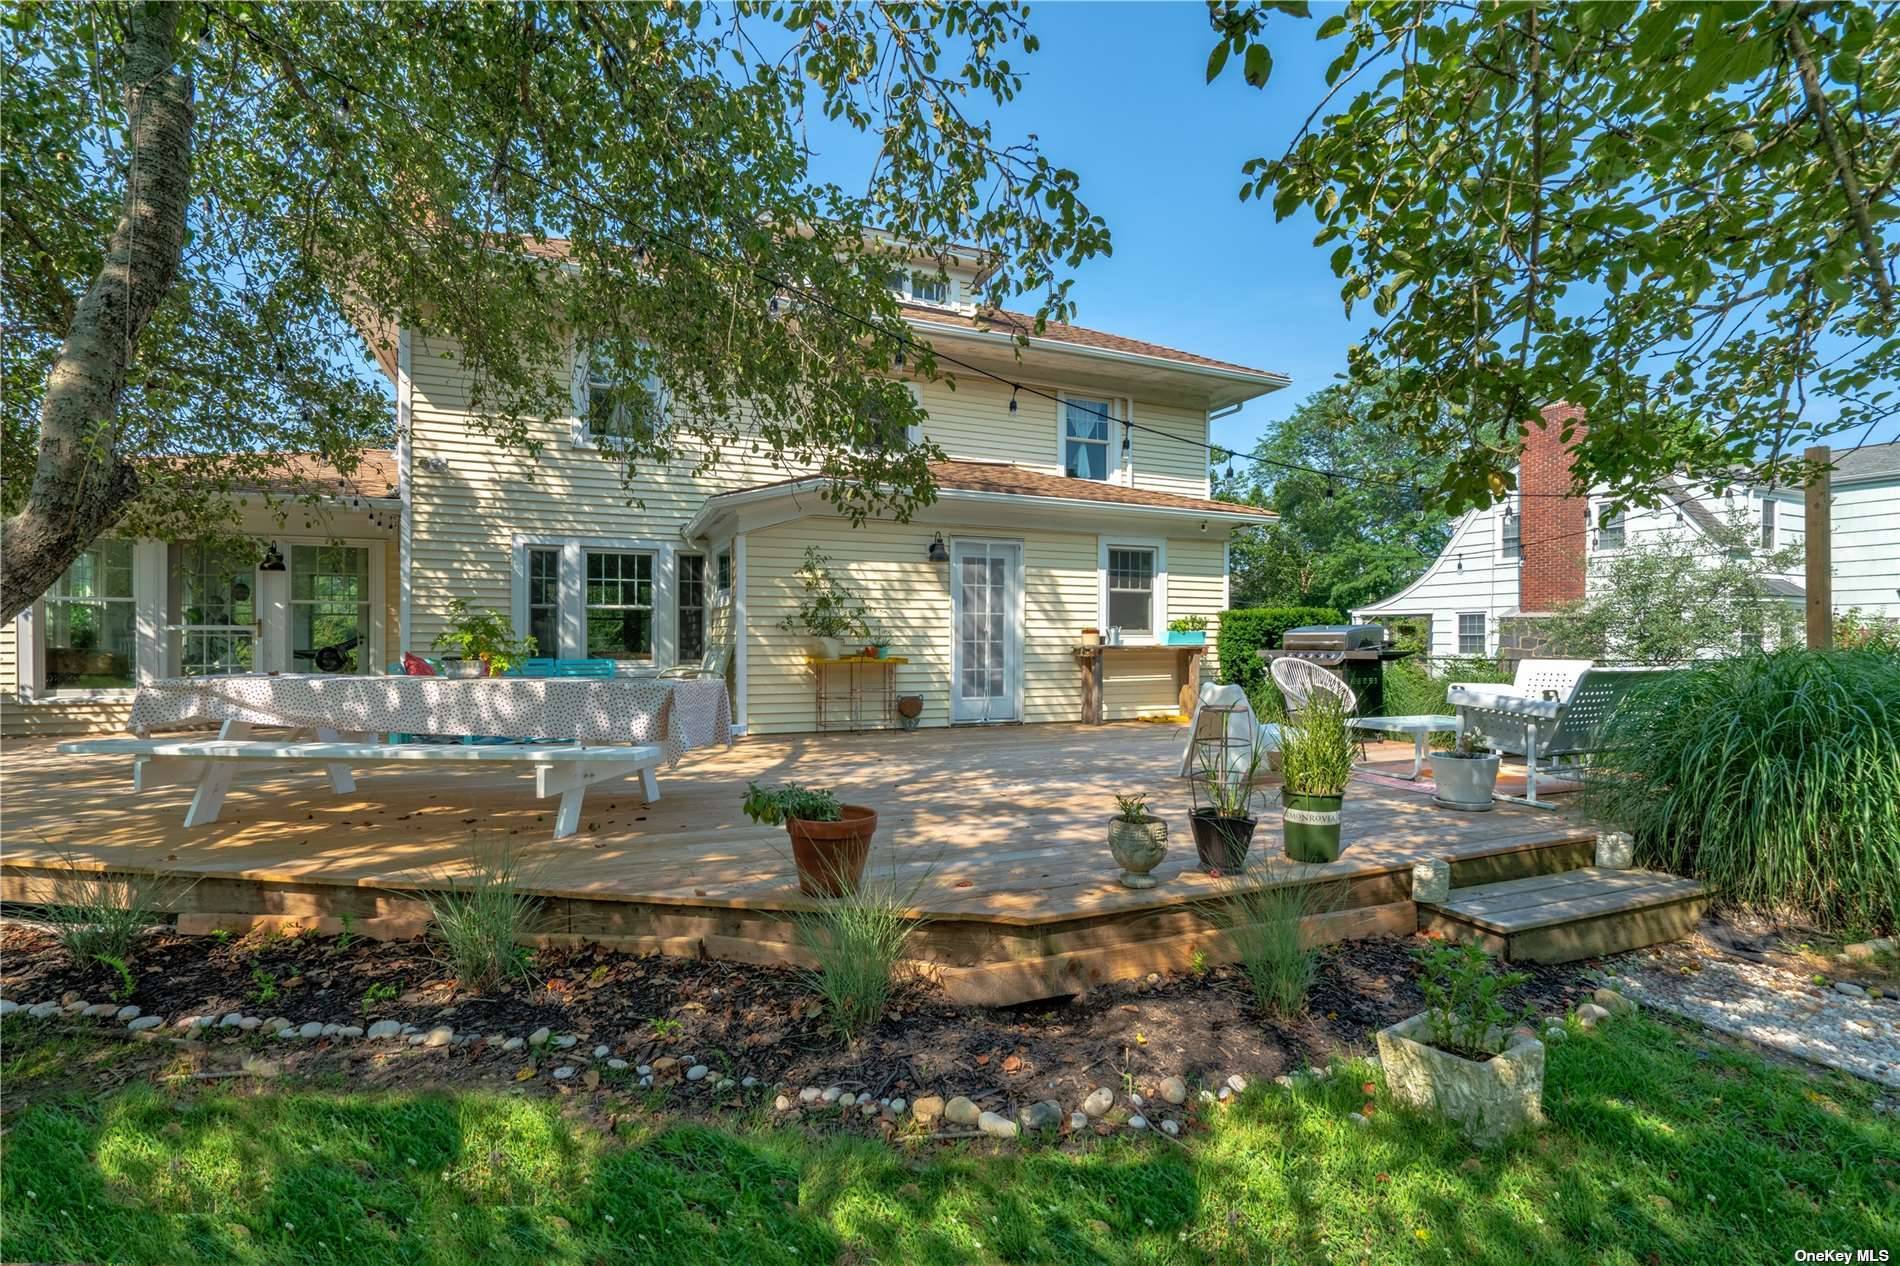 September 18, 000 and October 12, 000Exquisitely renovated 1920s light filled farmhouse situated on half acre is a perfect summer getaway whether entertaining or taking in time to have peace ...